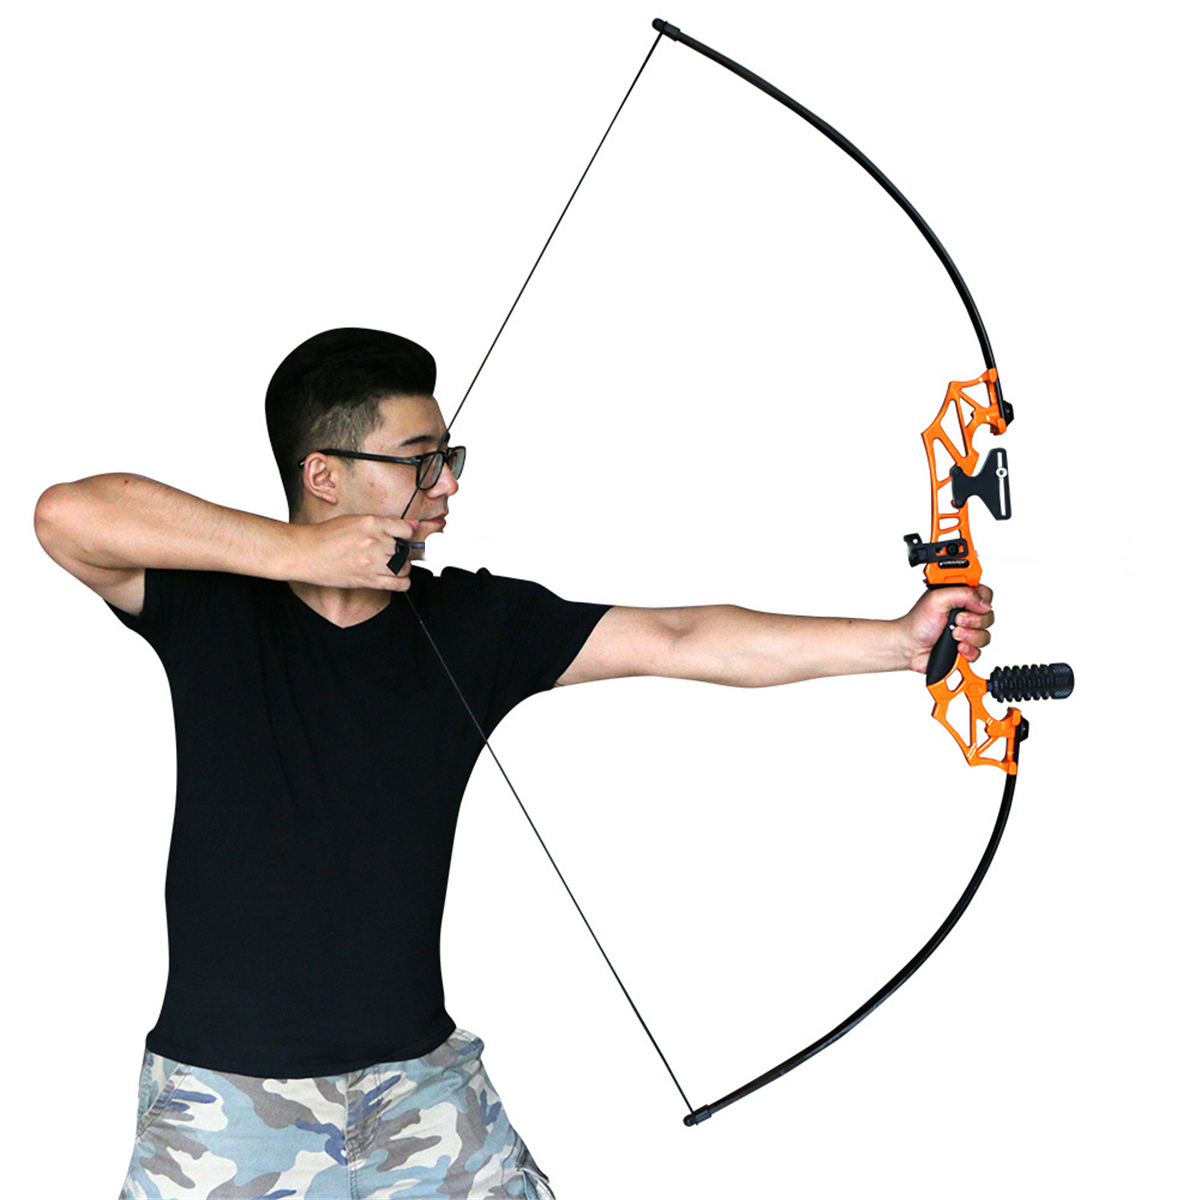 

54'' 30-40lbs Archery Bow Straight Long Bow Compound Hunting Shooting Practice Takedown Bow Stand